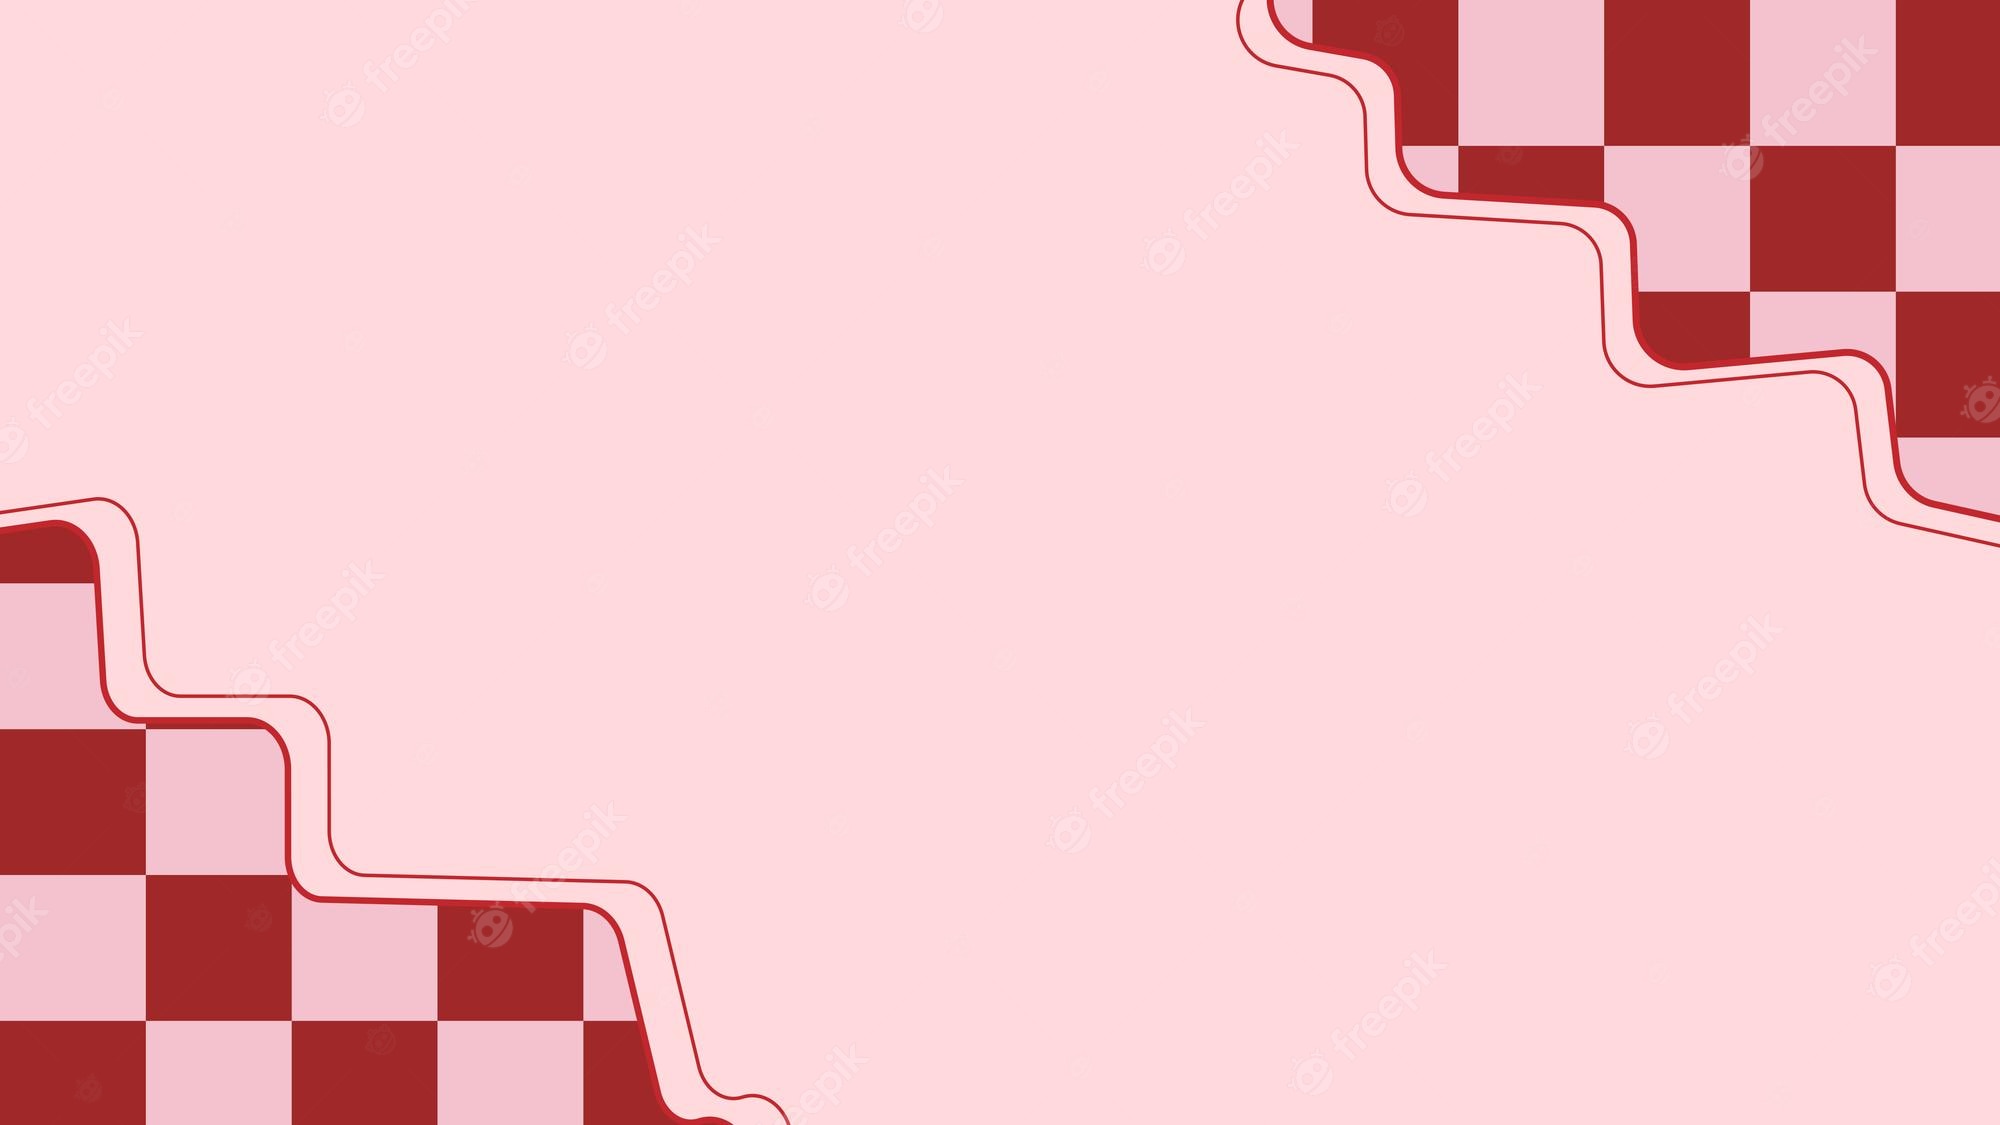 A pink and red checkered background with a wavy line on the left side of the image - Light red, vector